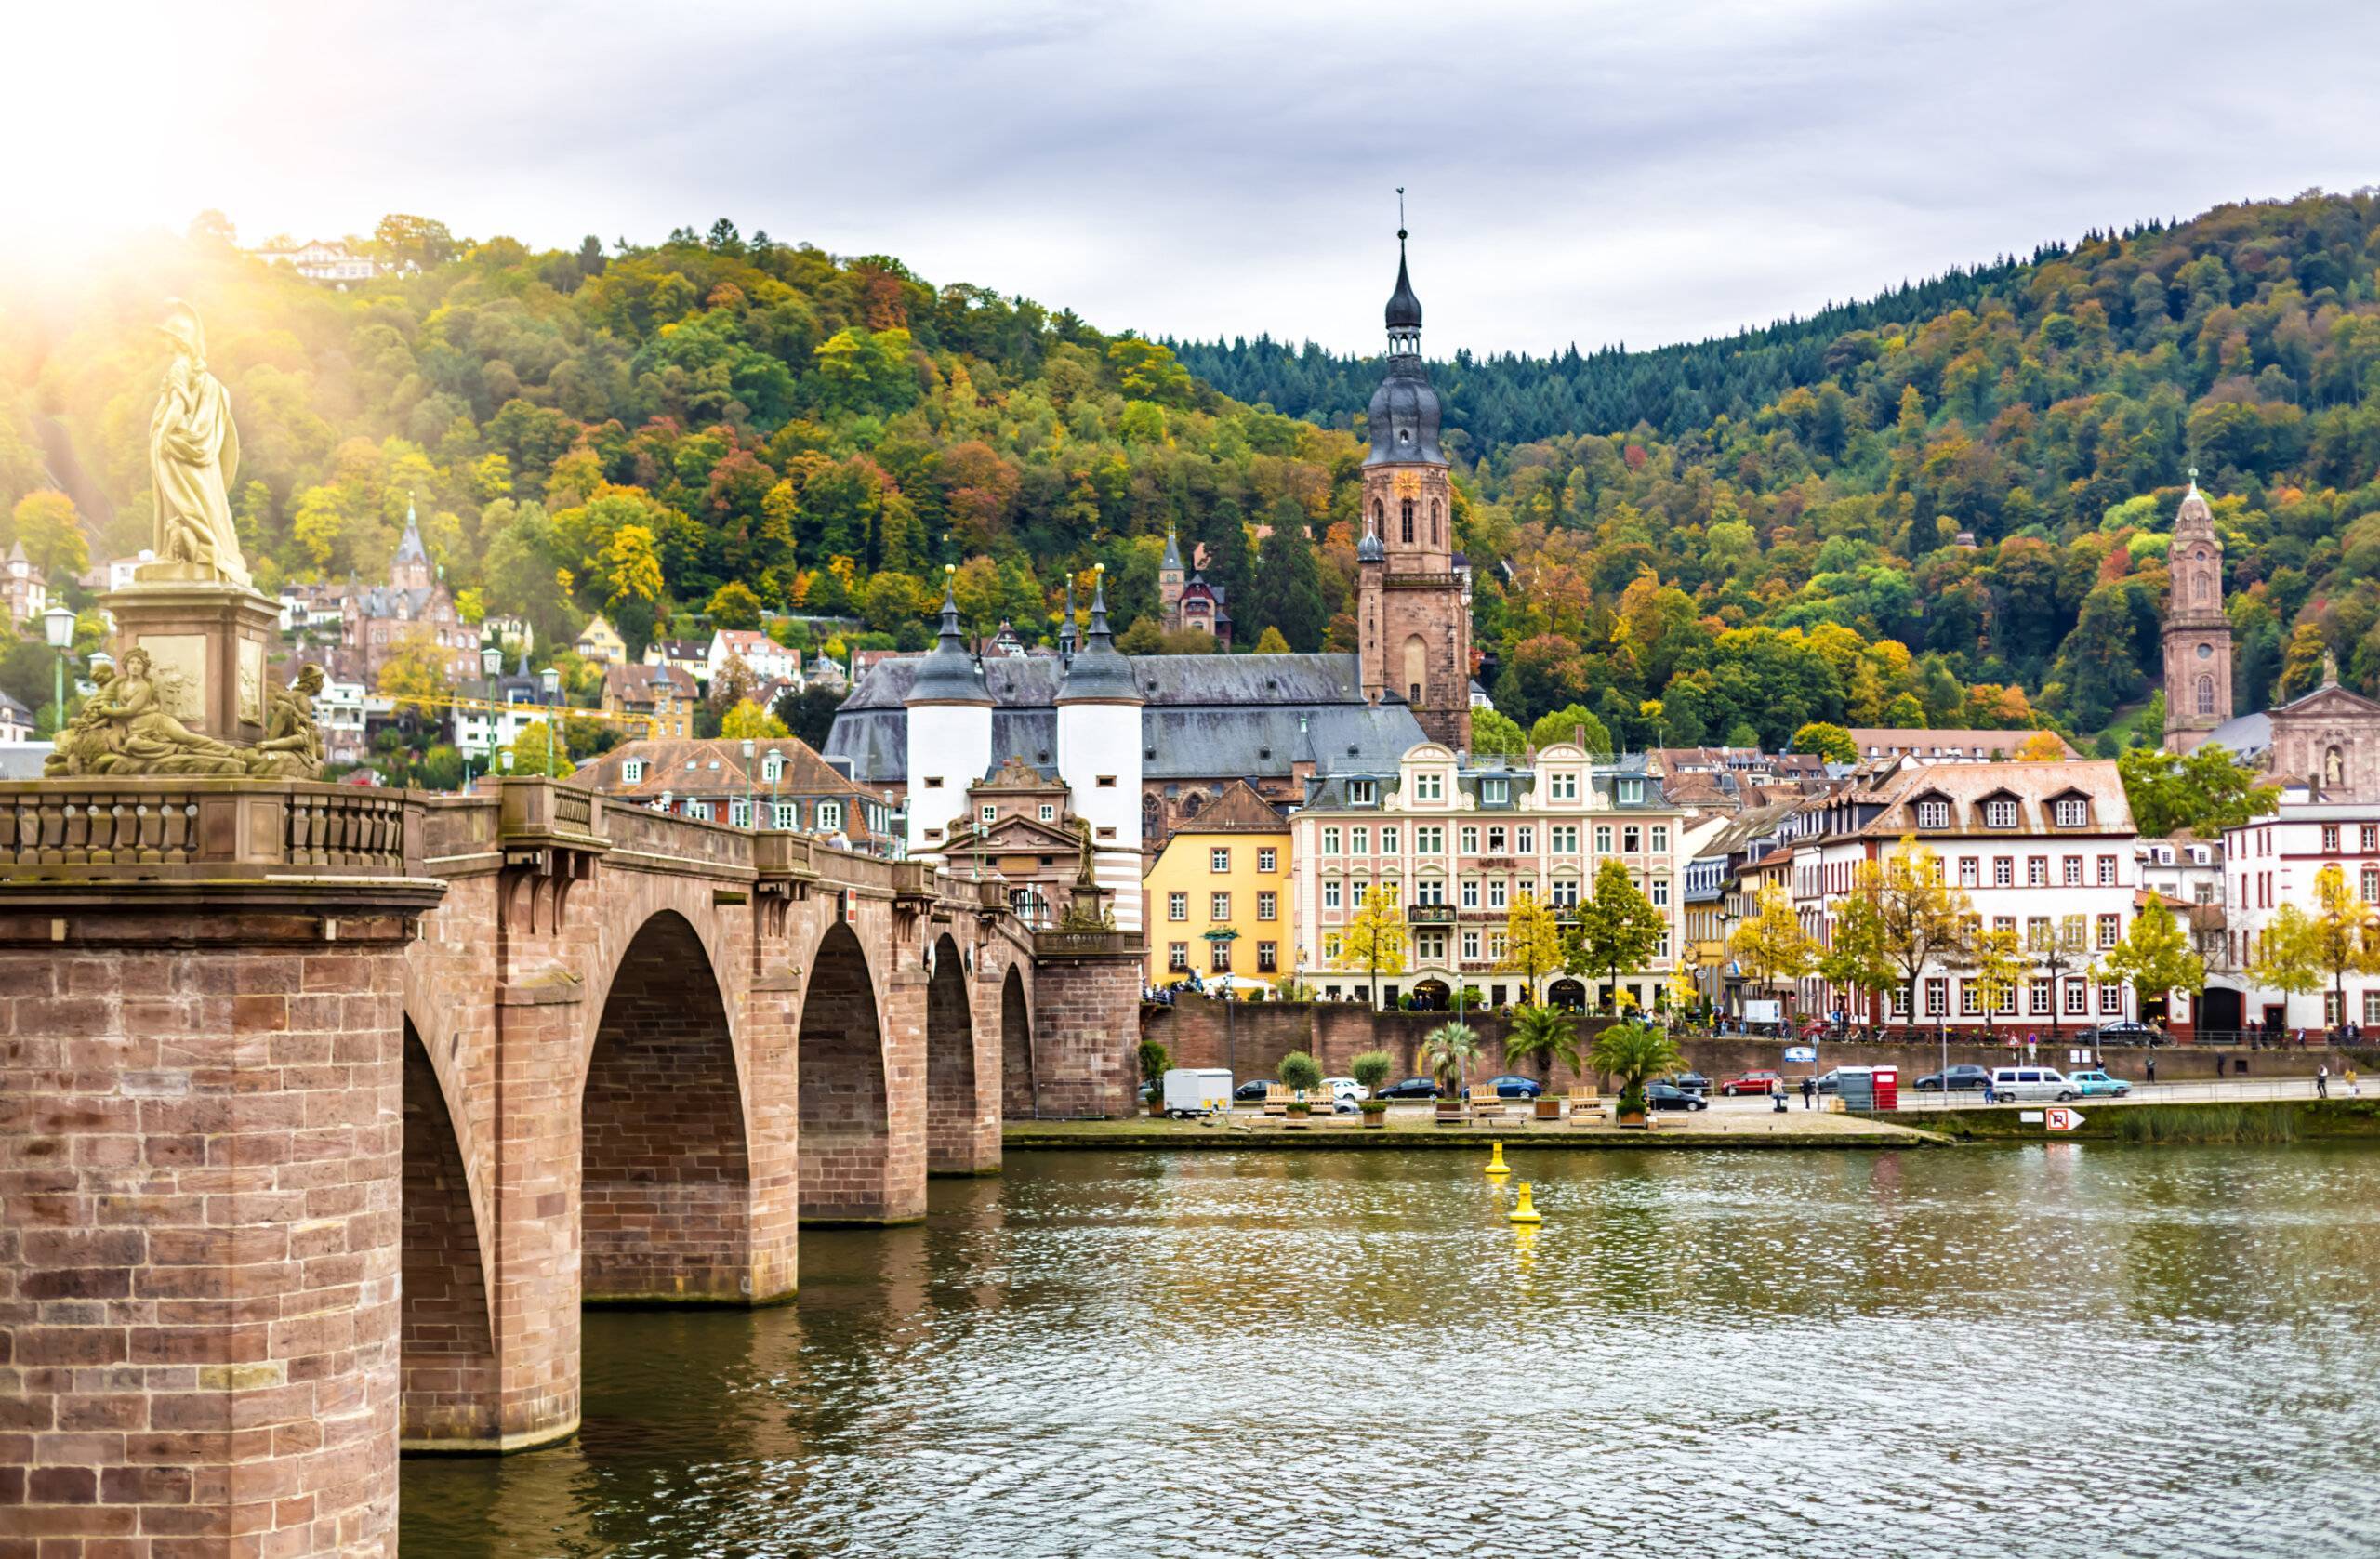 A view of the old bridge and village in Heidelberg